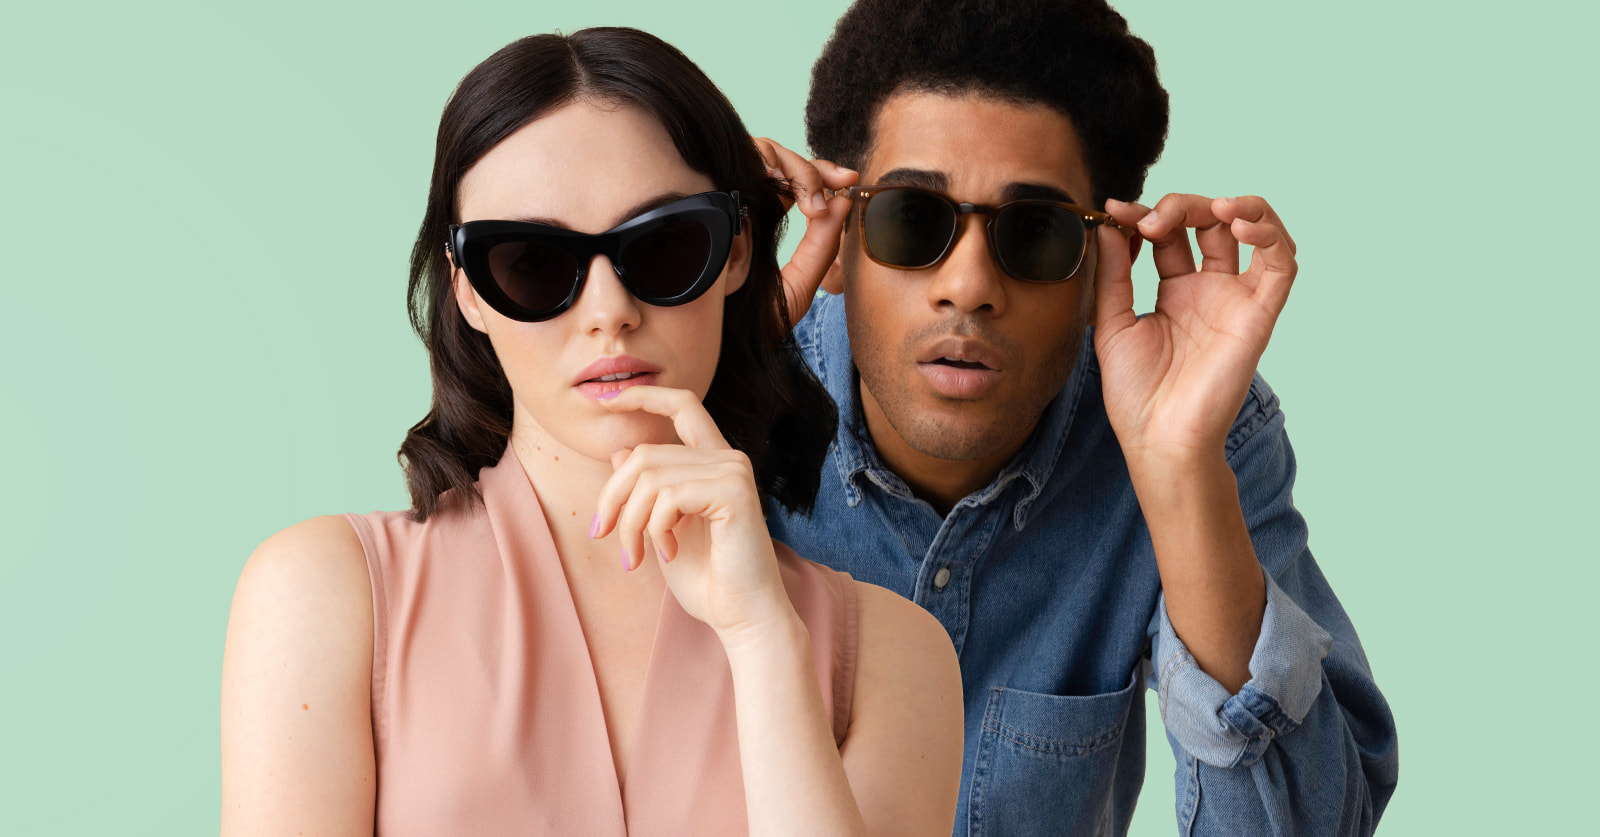 How to find the perfect sunglasses for your face shape